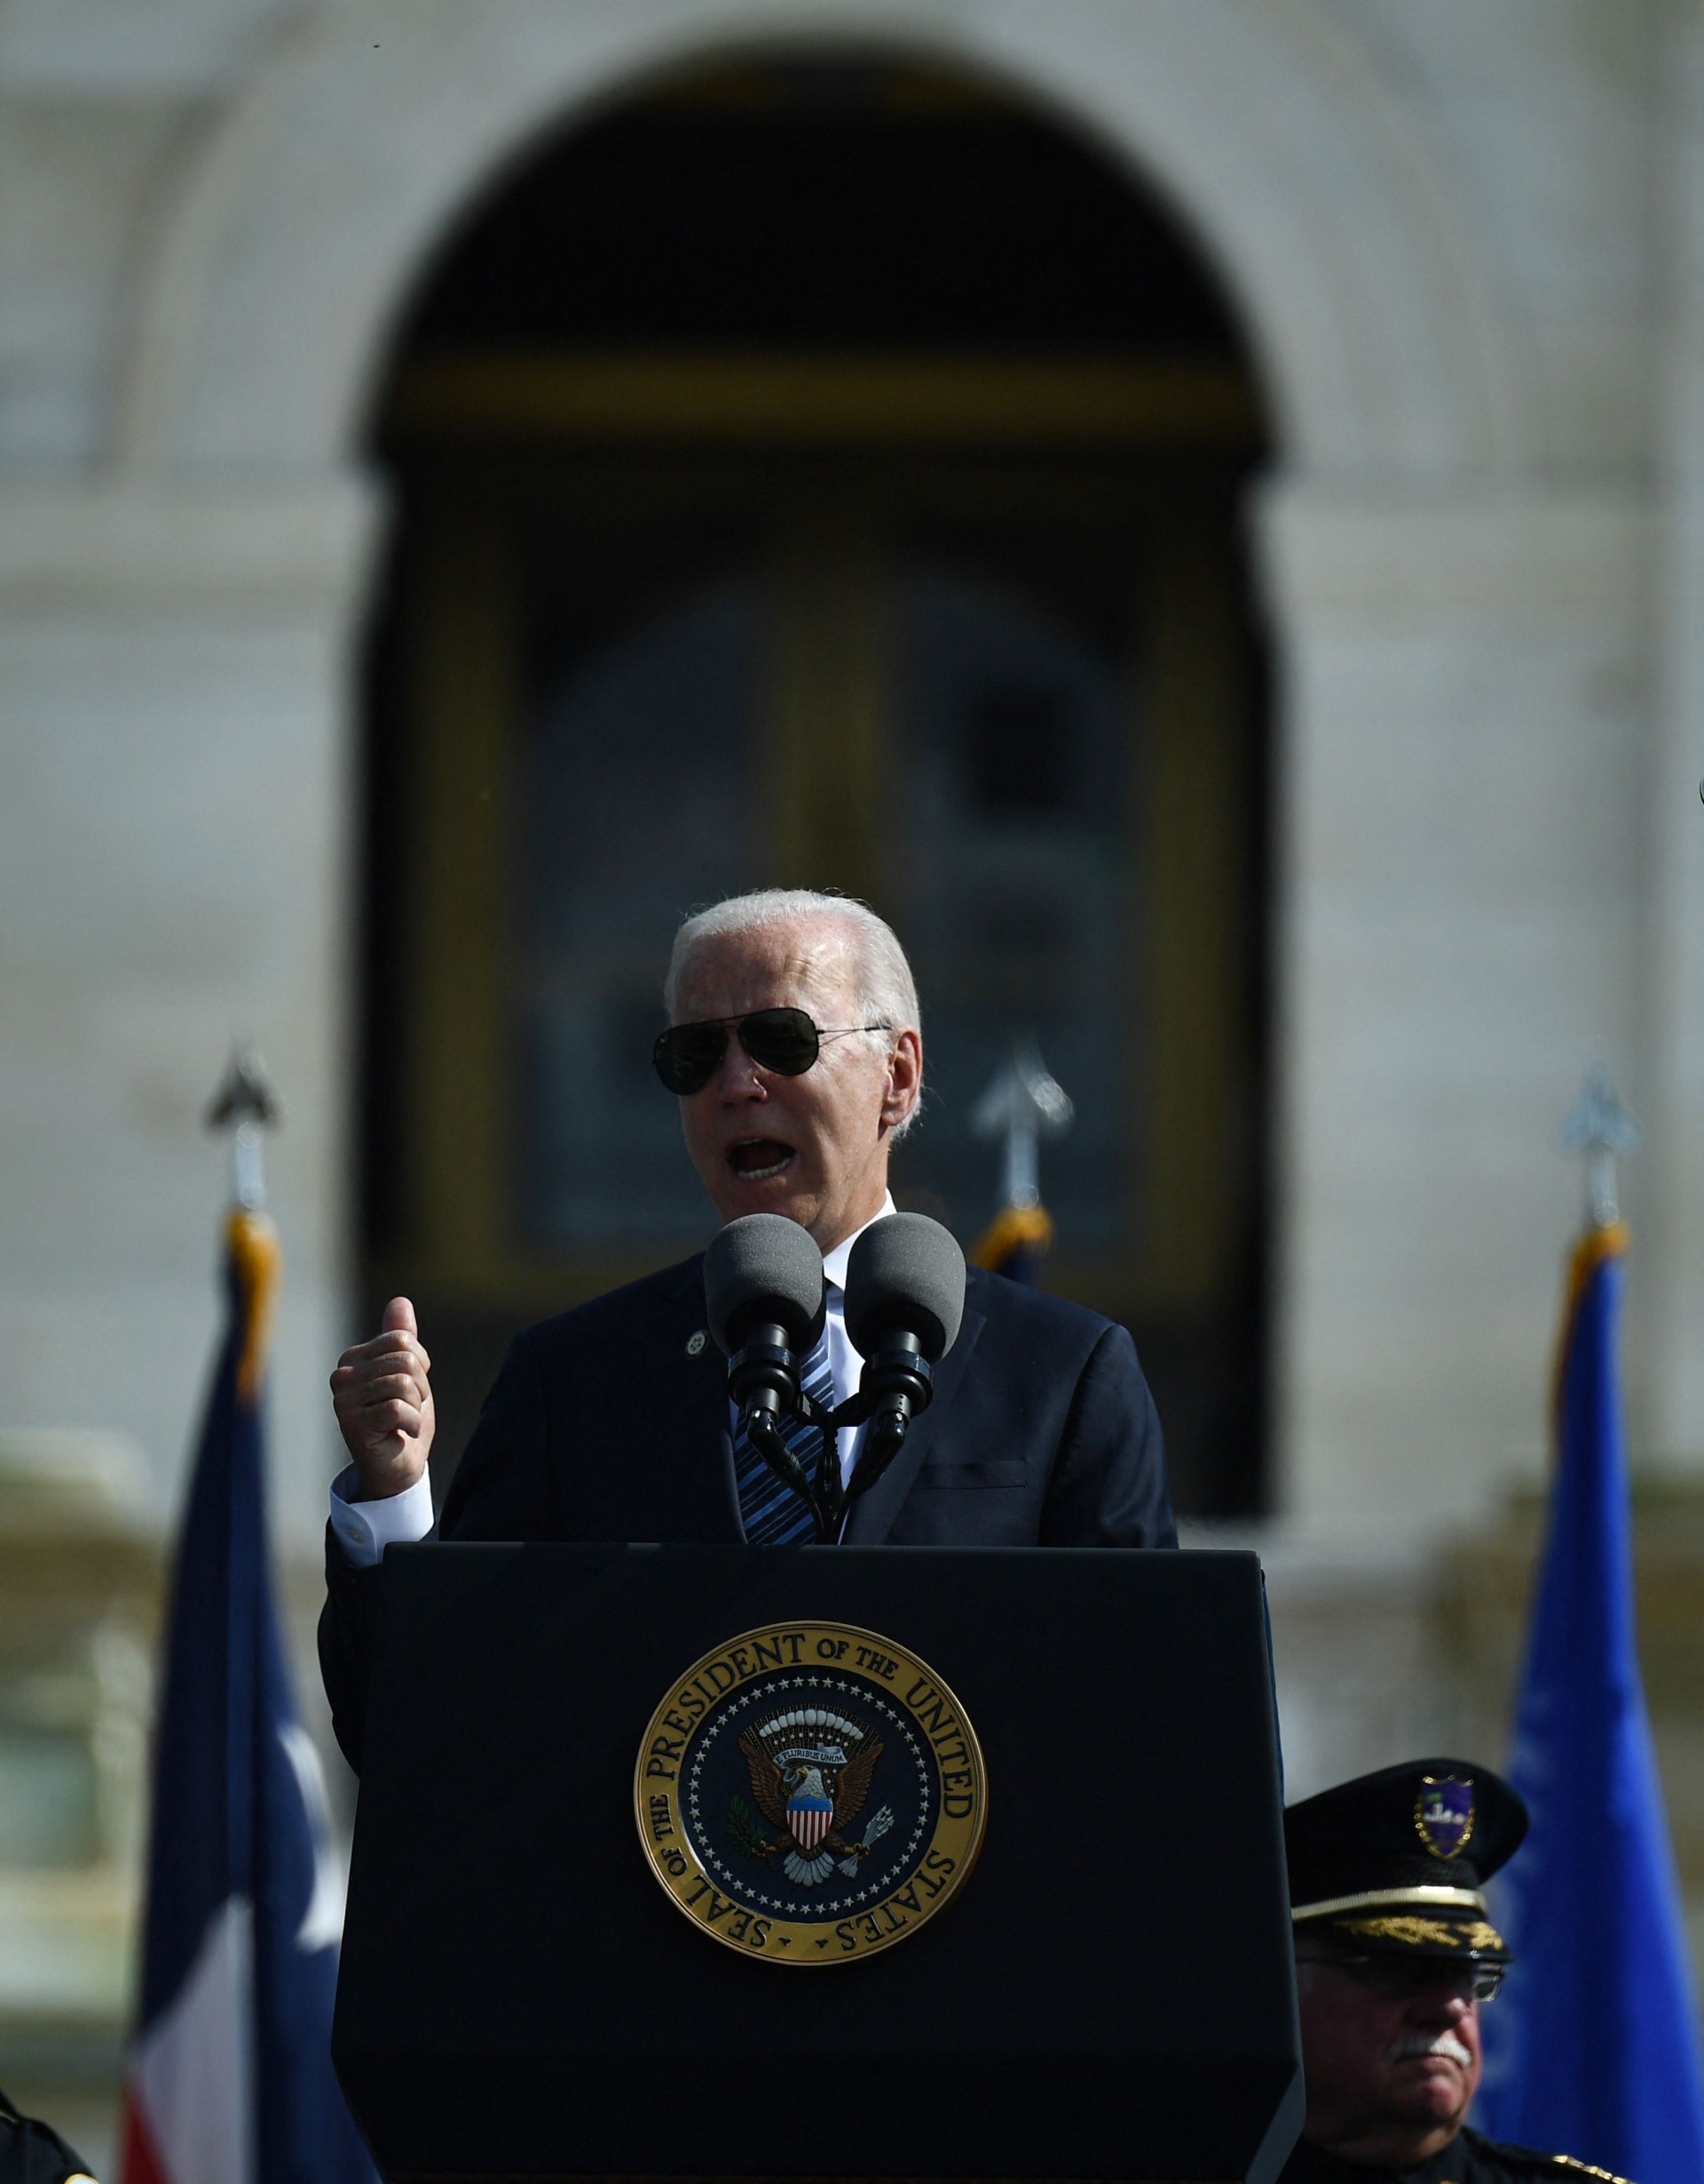 US President Joe Biden speaks during the 40th Annual National Peace Officers Memorial Service at the US Capitol in Washington, DC, on October 16, 2021. (Photo by Brendan Smialowski / AFP) (Photo by BRENDAN SMIALOWSKI/AFP via Getty Images)